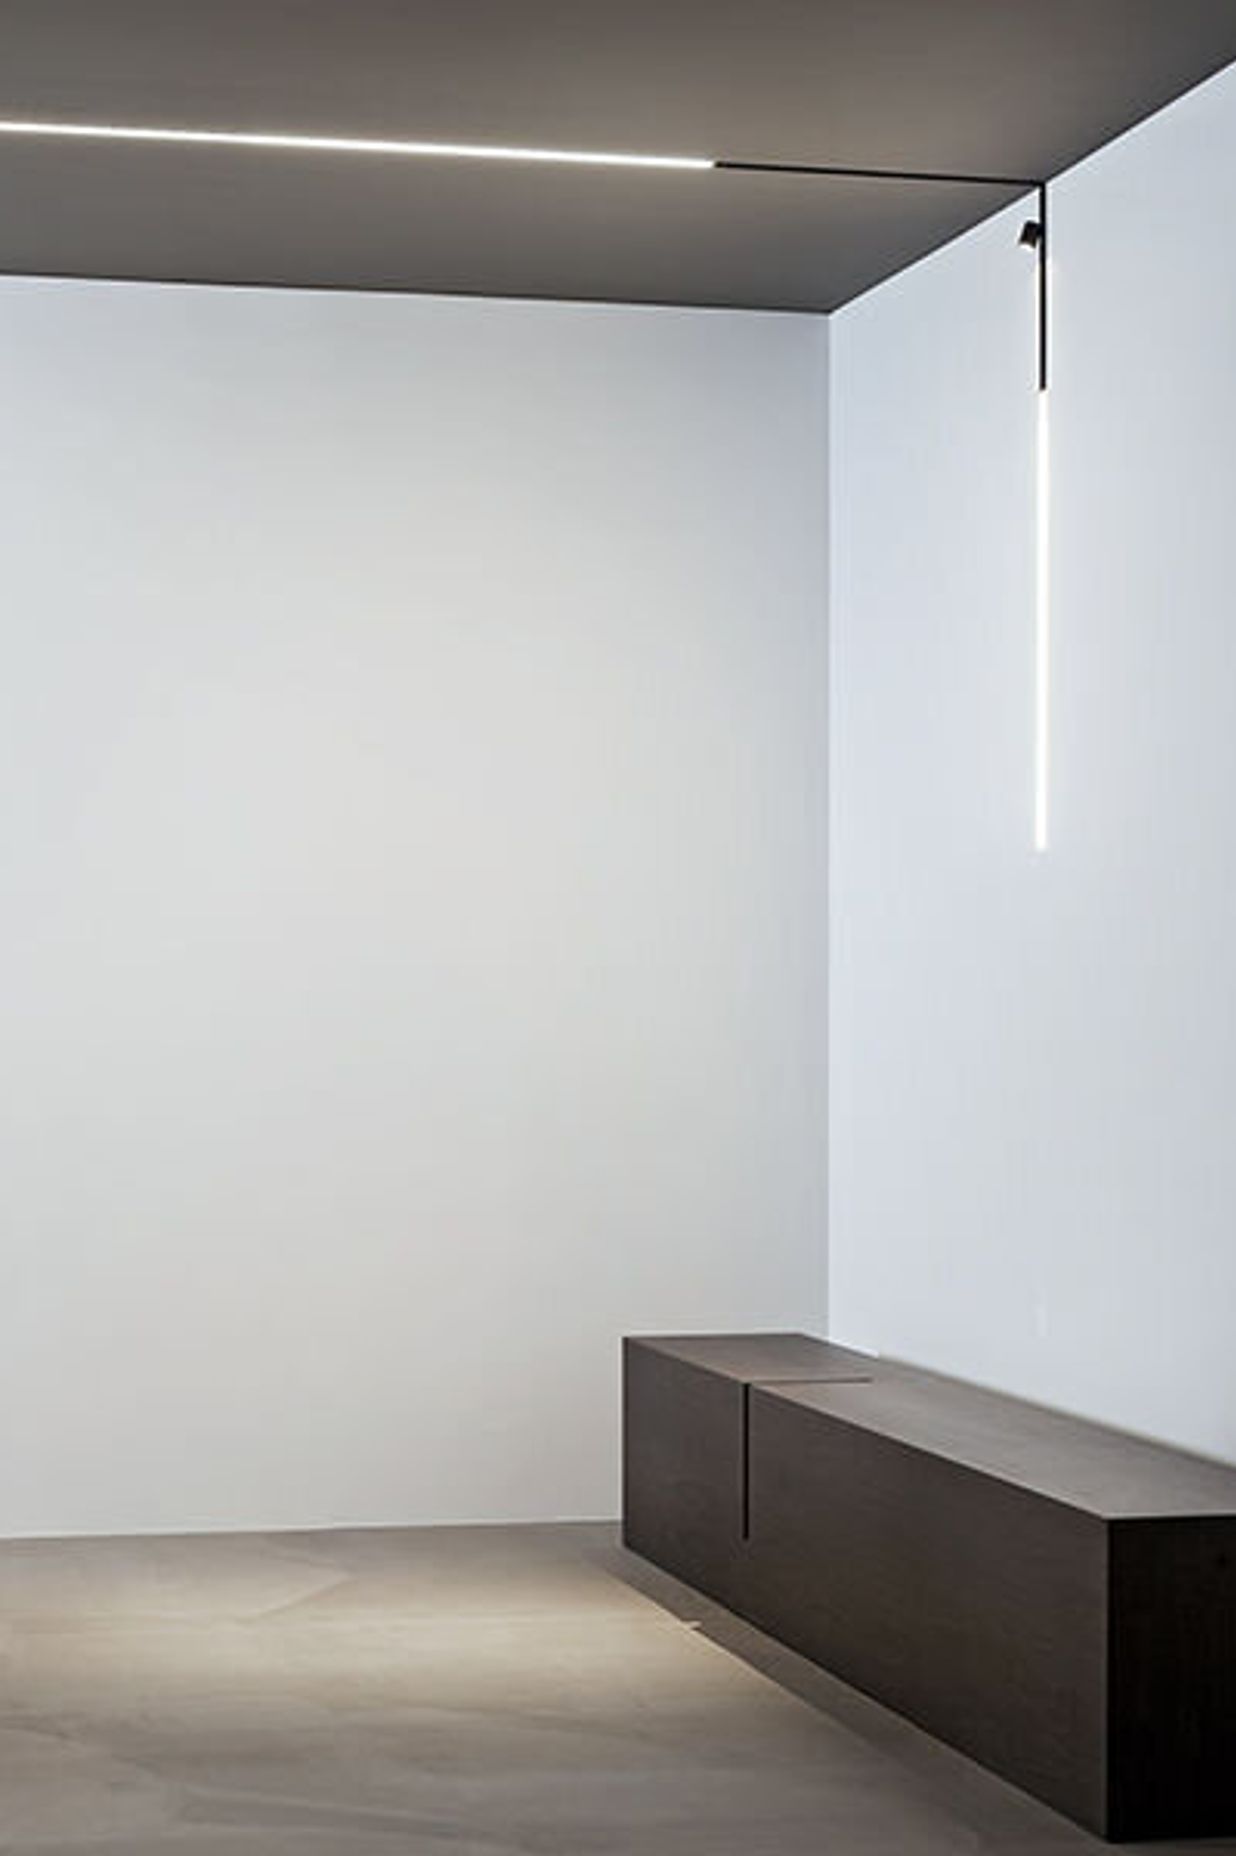 The Running Magnet by Flos Architectural is recessed into the architecture then luminaires clip on magnetically